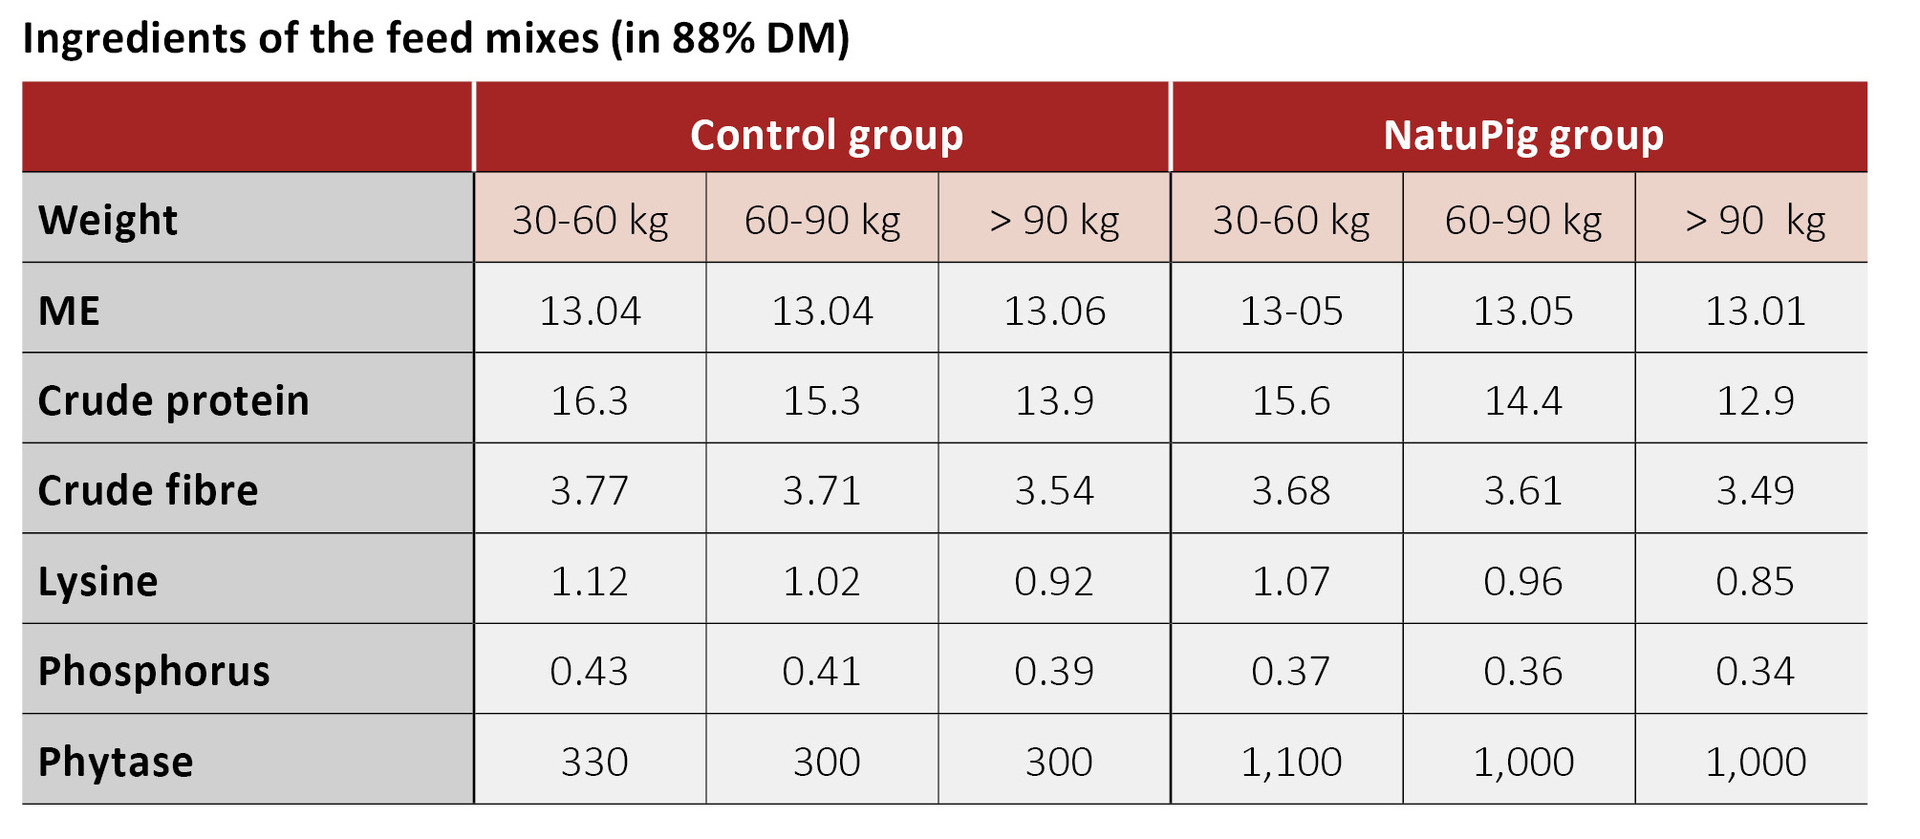 Feed blend ingredients in the NATUPIG and control groups